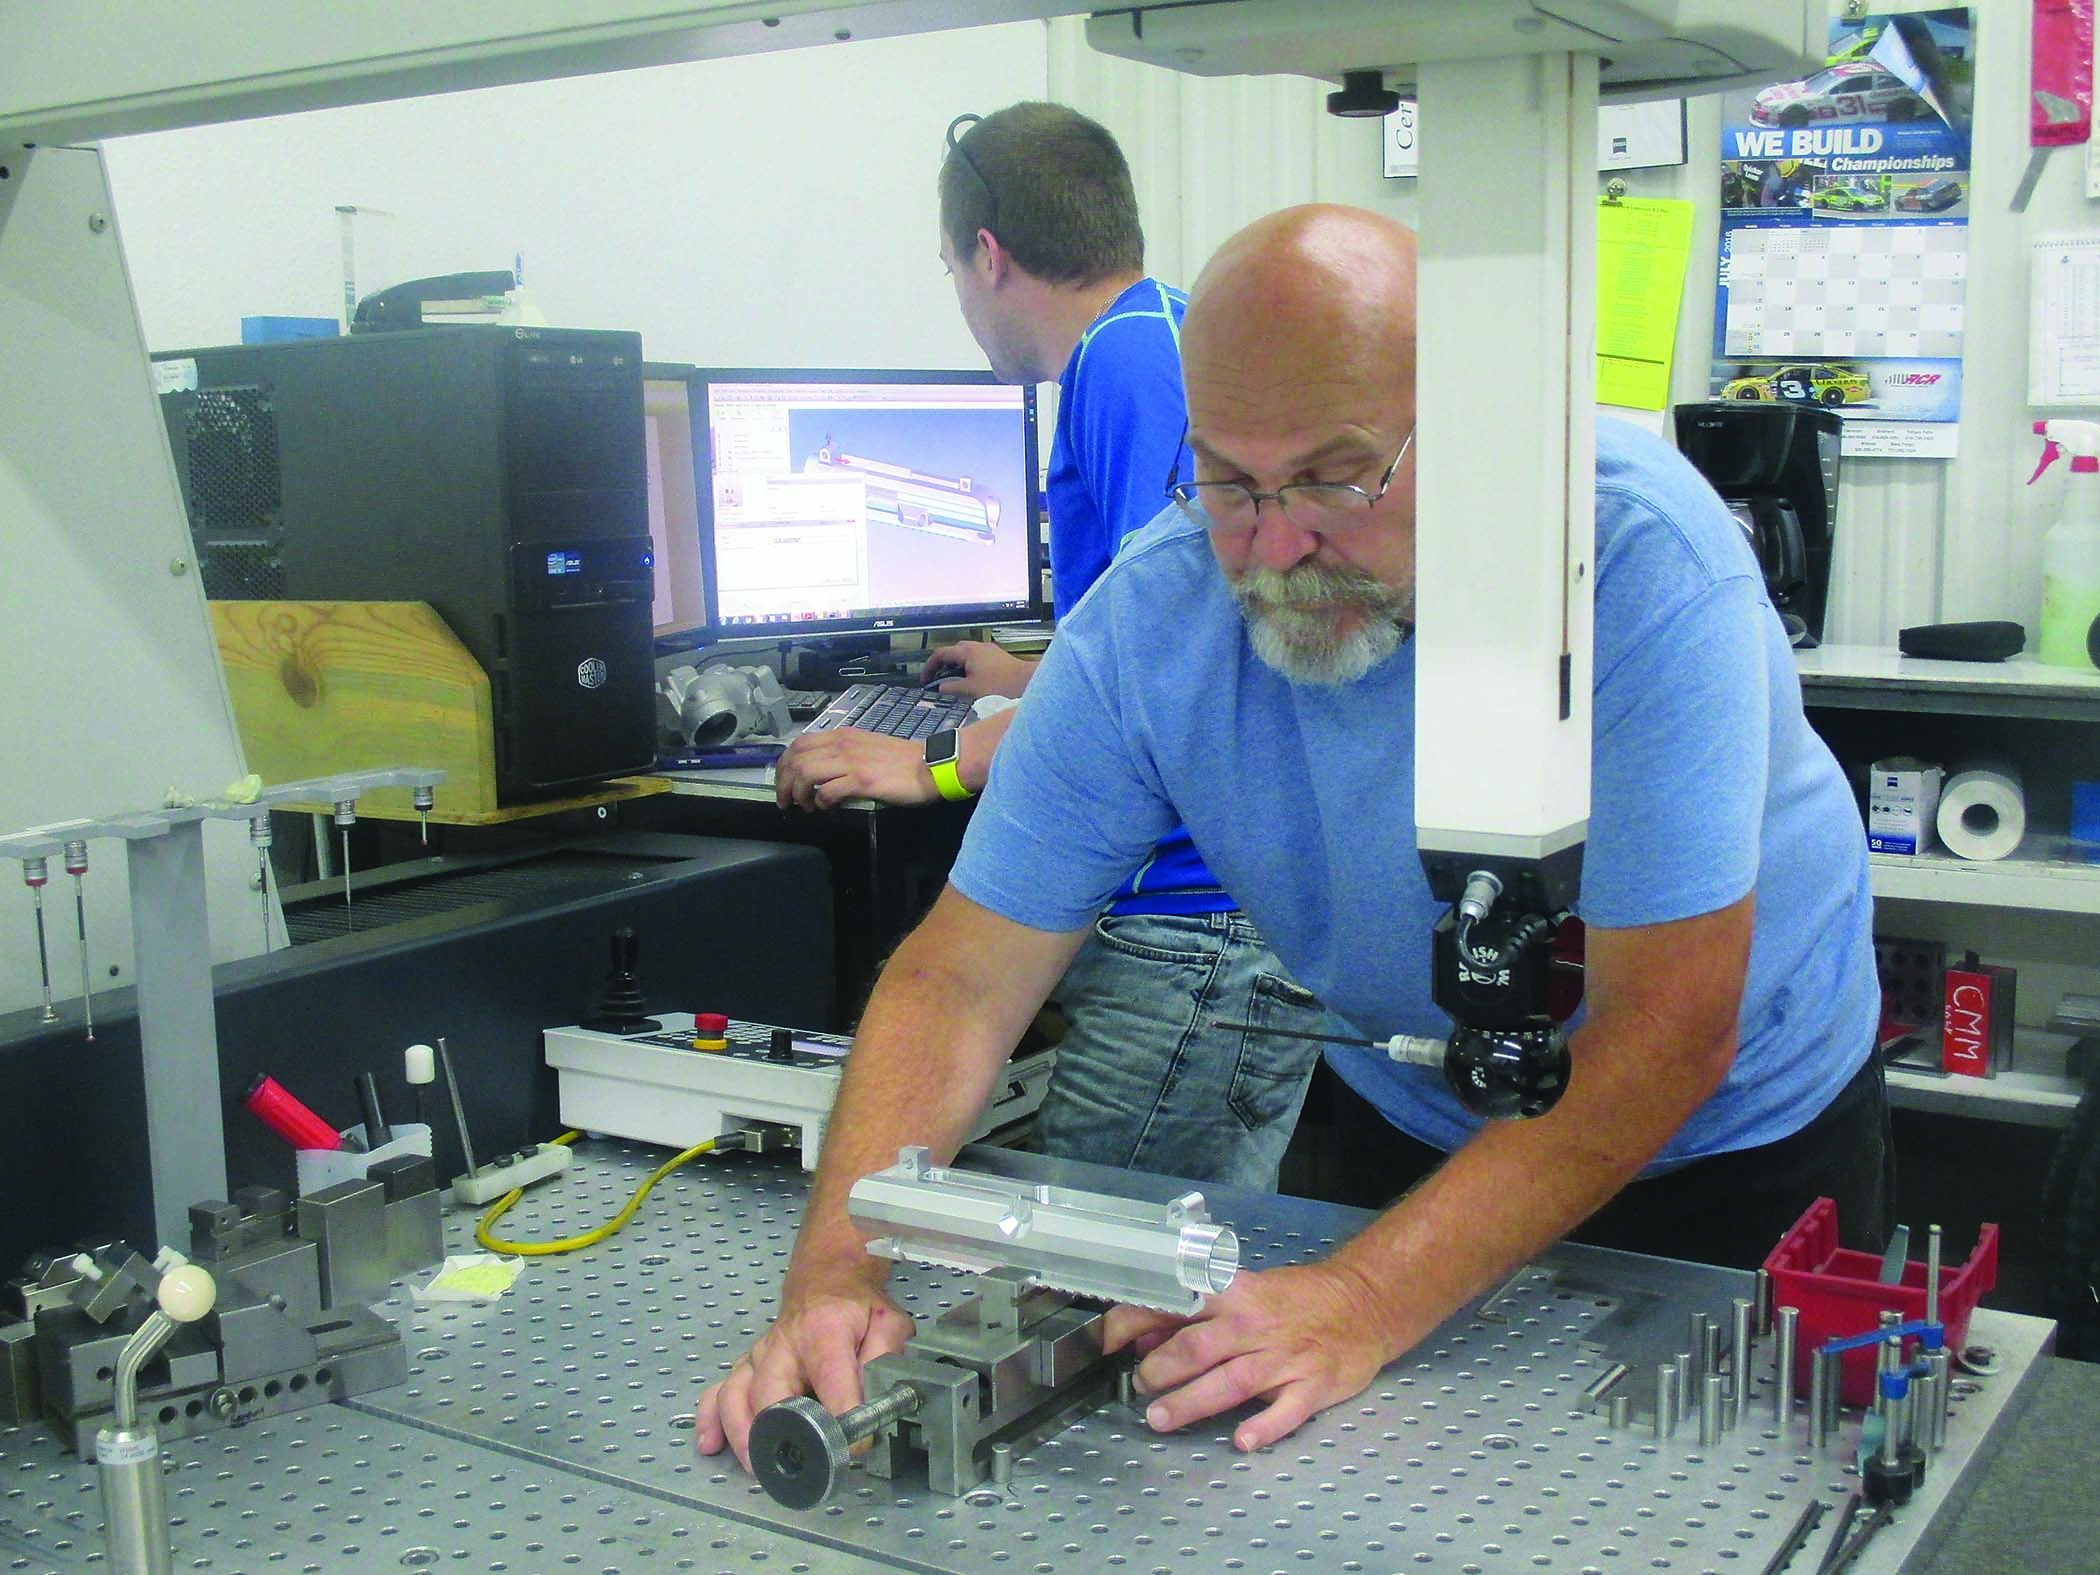 Alexandria Pro-Fab Alexandria Pro-Fab operates CNC turning and milling machines, along with robots, lathes, grinders, saws and a wire electrical discharge machine, and performs small assembly and open setups.